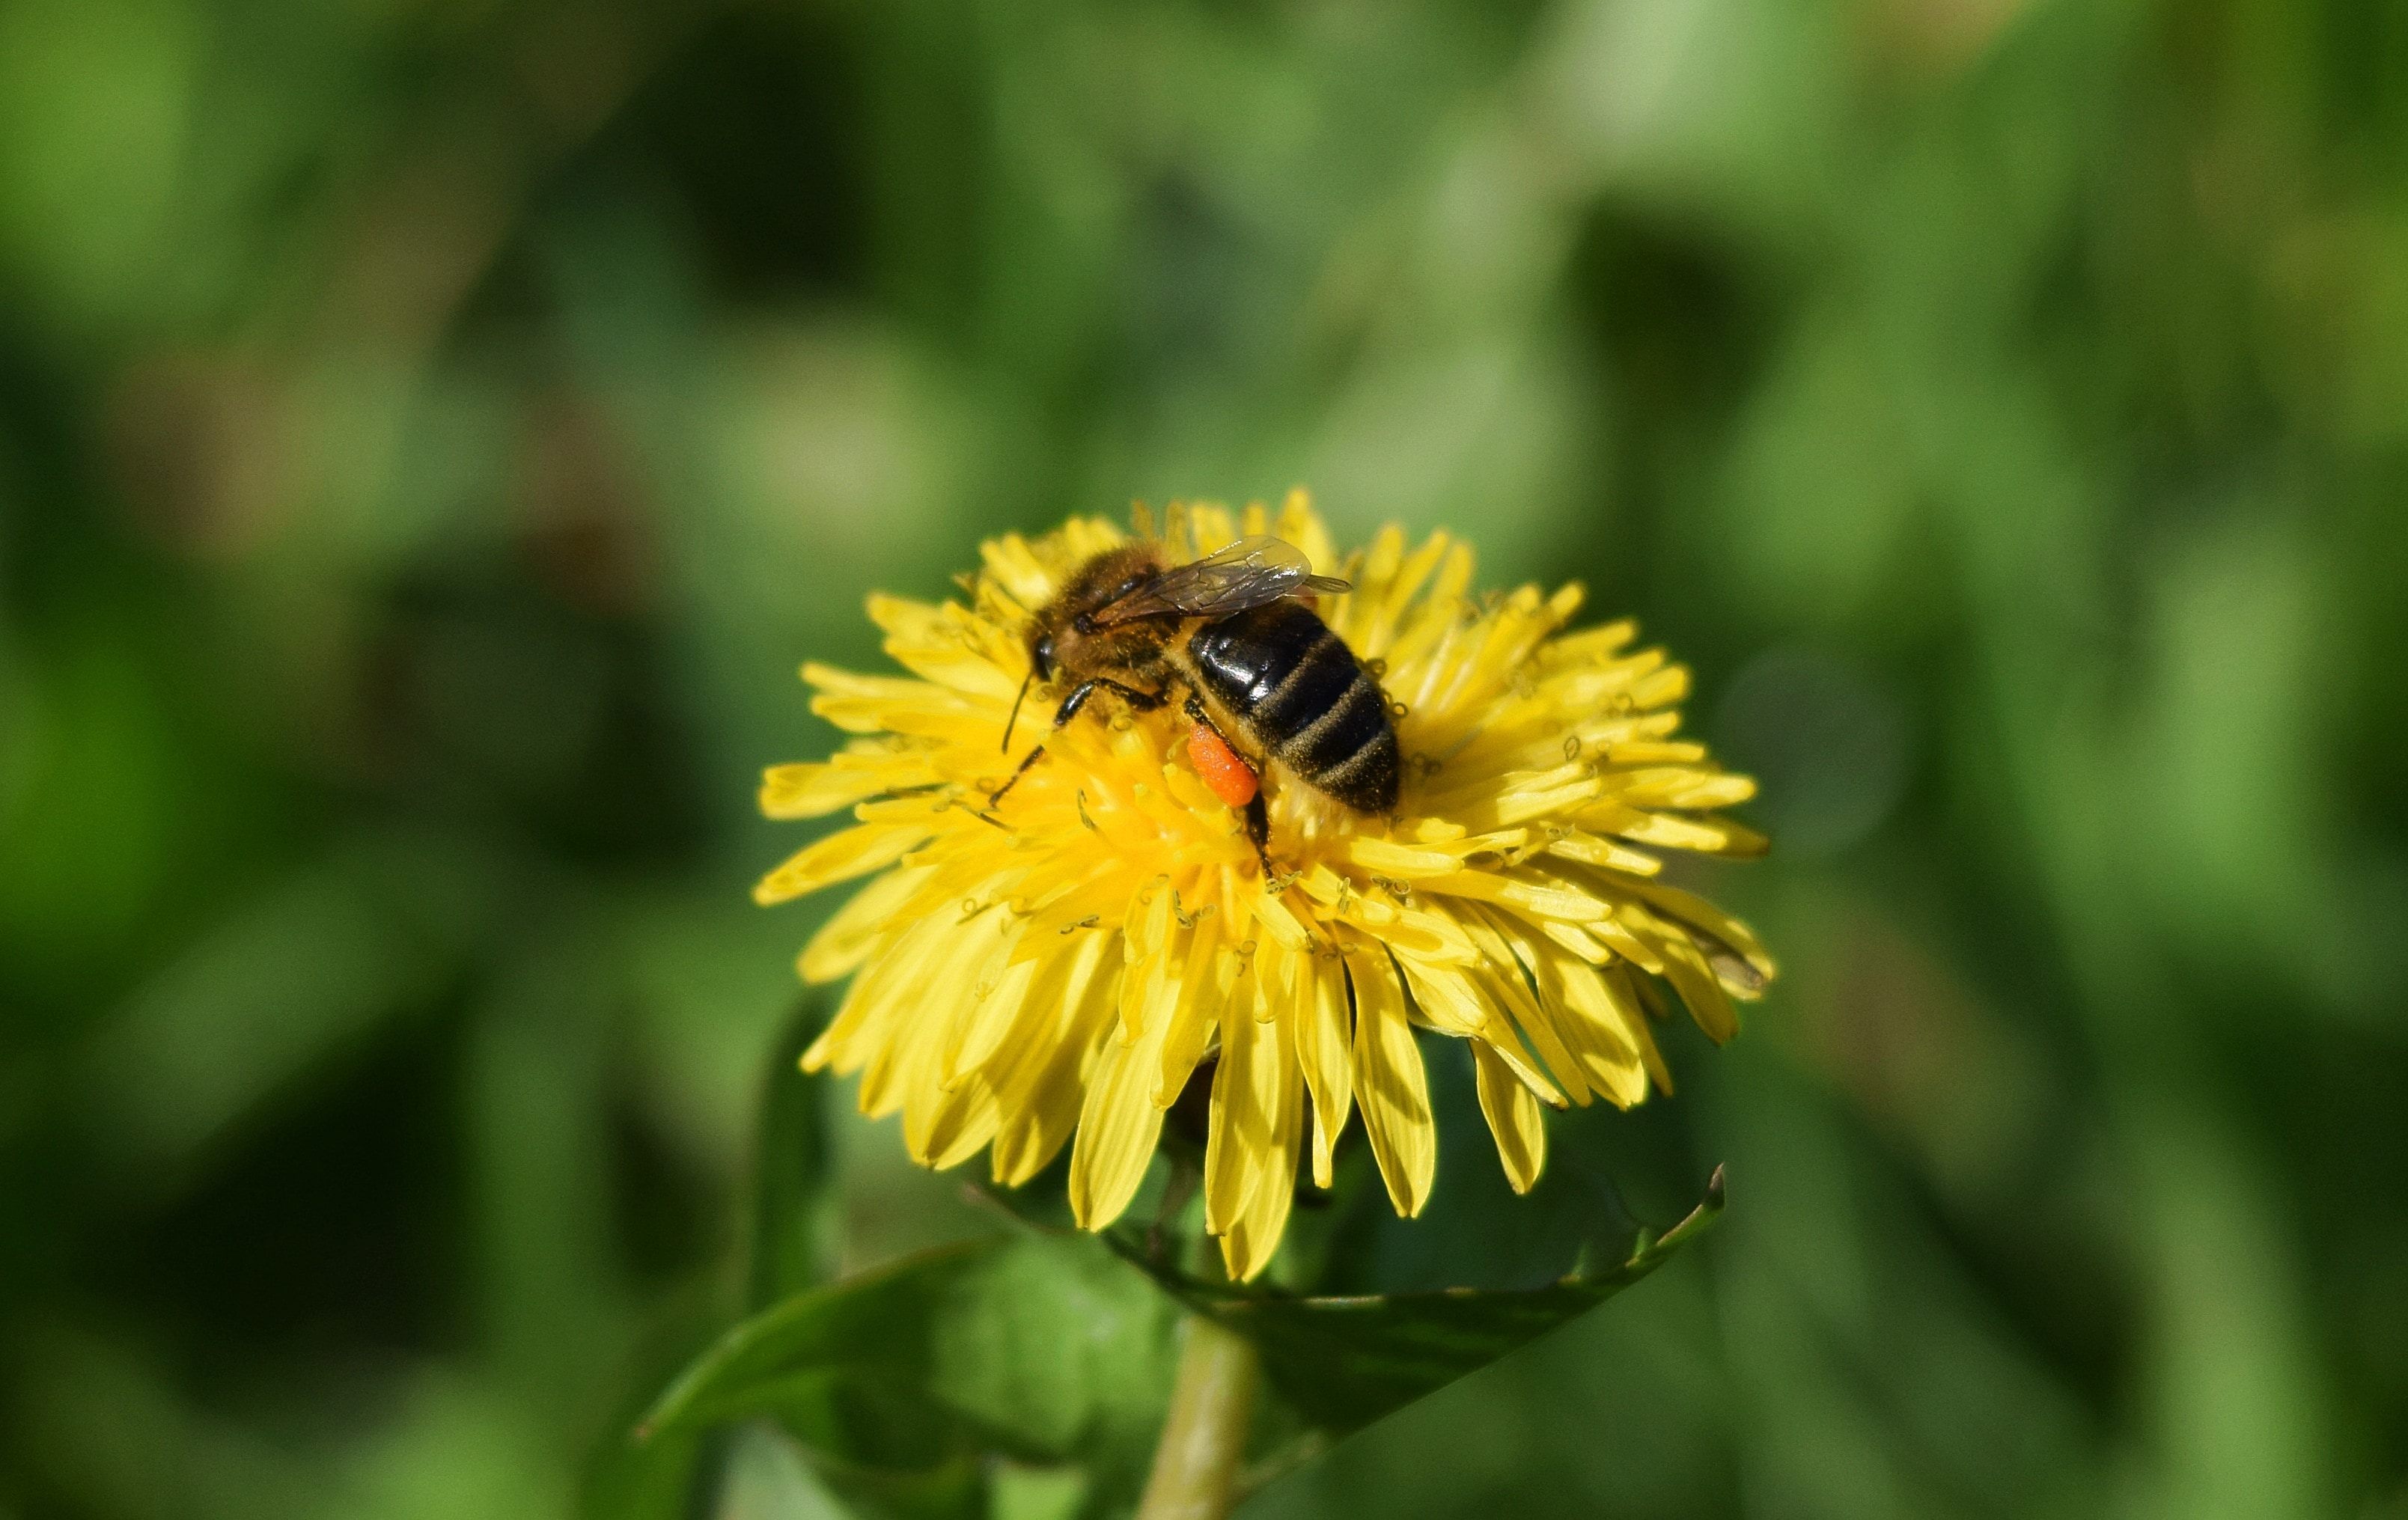 honey bee perched on yellow full-bloomed flower in shallow focus lens